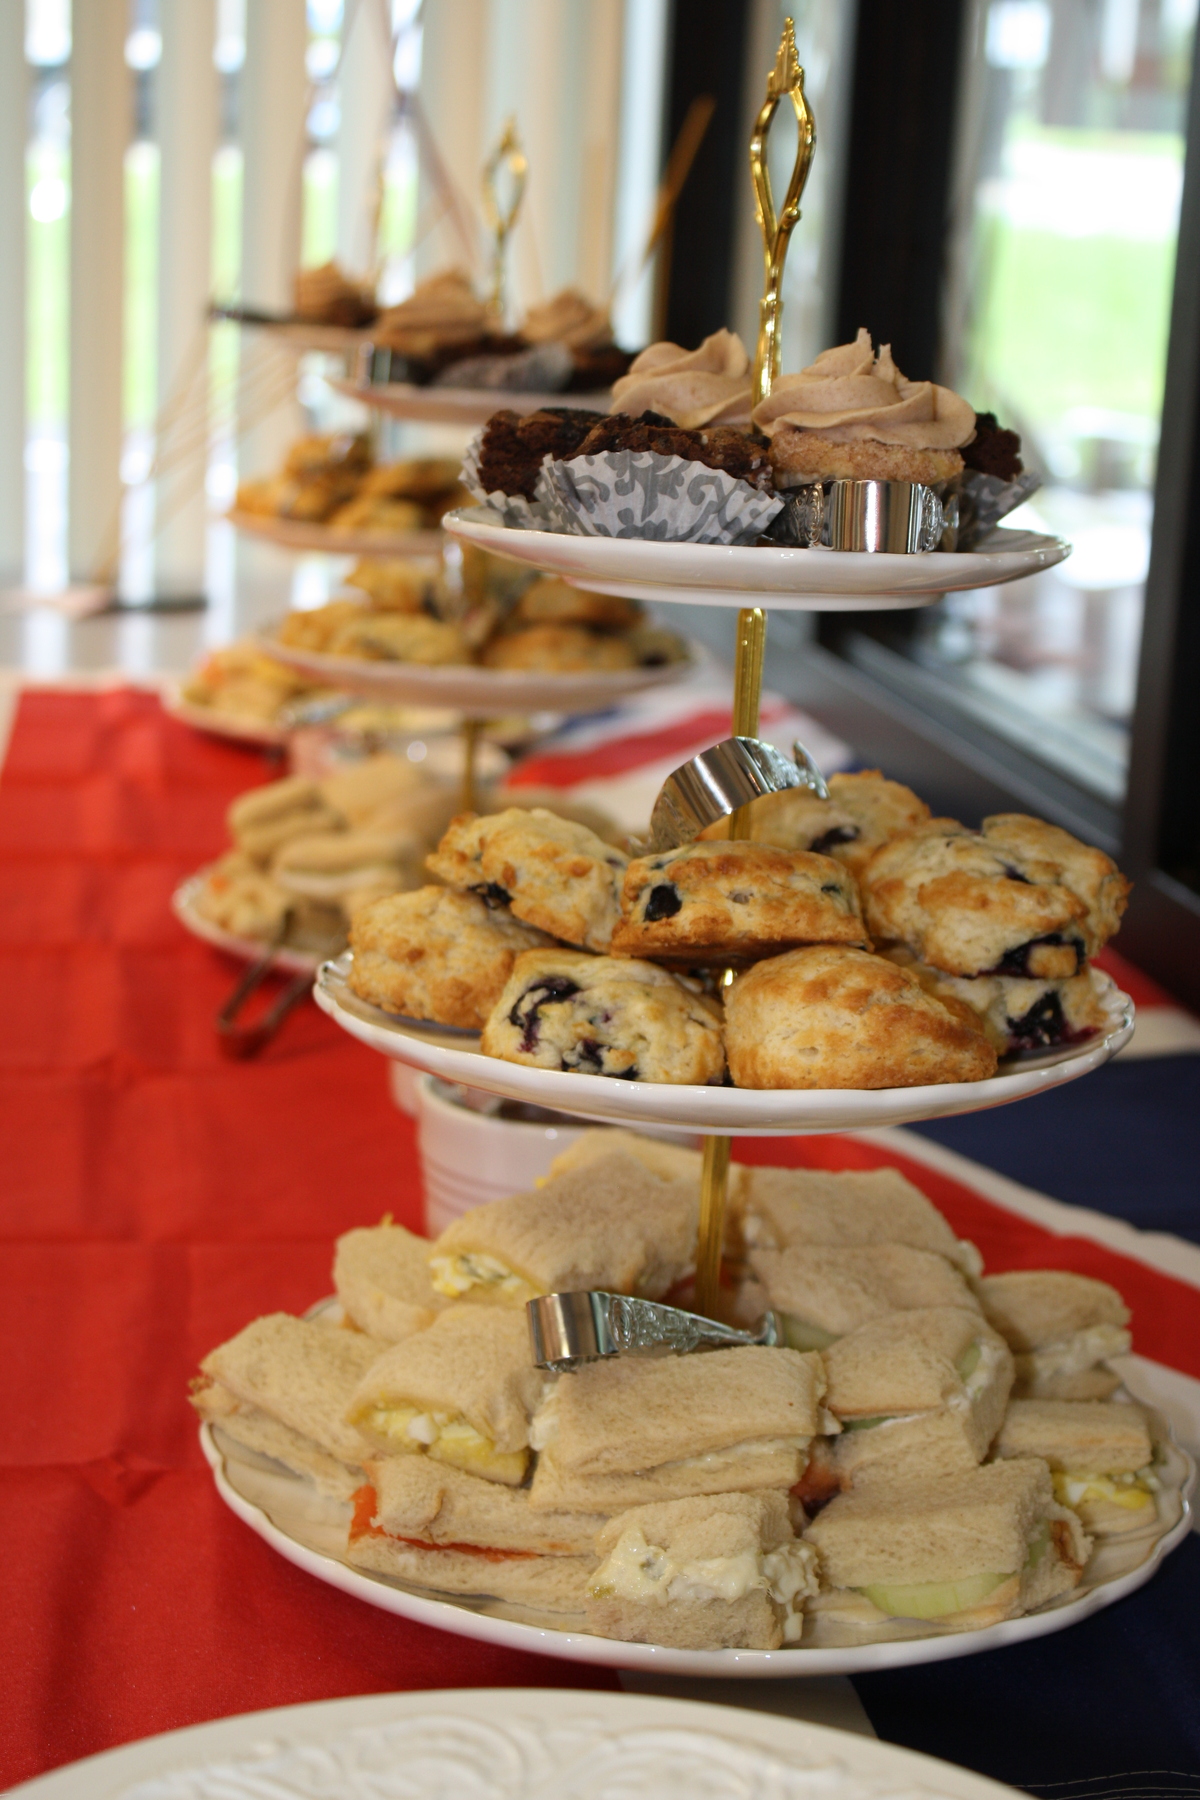 Three tiers of yumminess: a delicious variety of dainty tea sandwiches, scones & sweet treats!